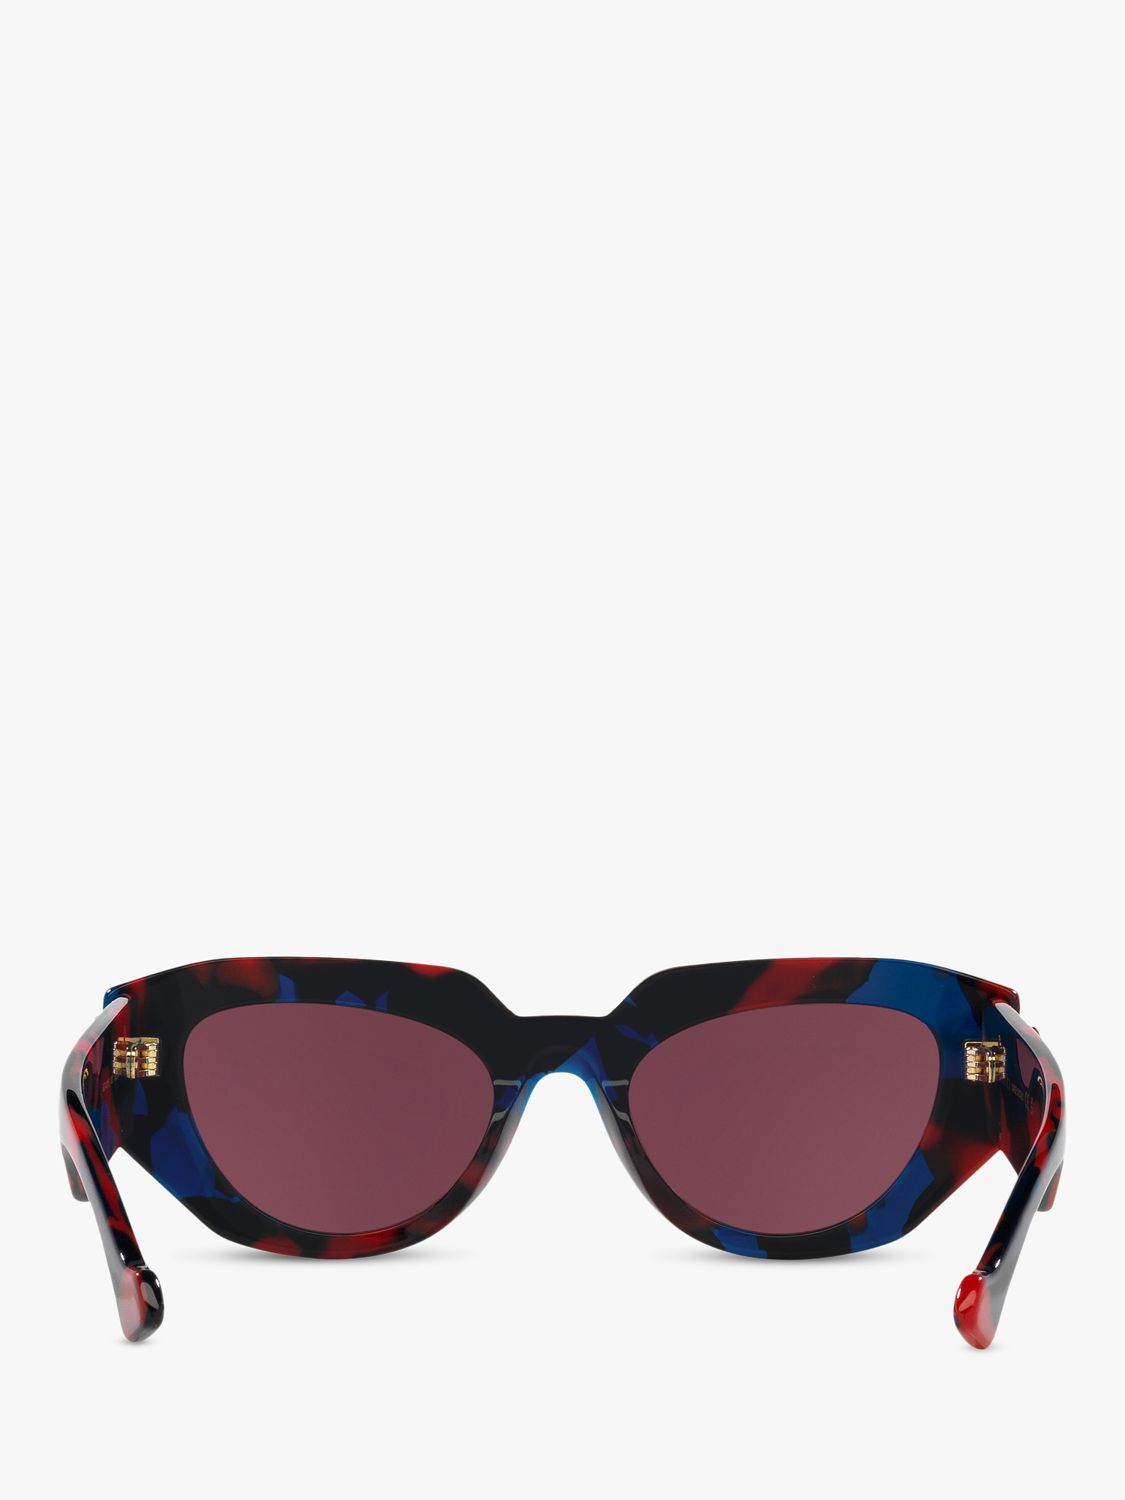 Buy Gucci GG1421S Women's Oval Sunglasses Online at johnlewis.com